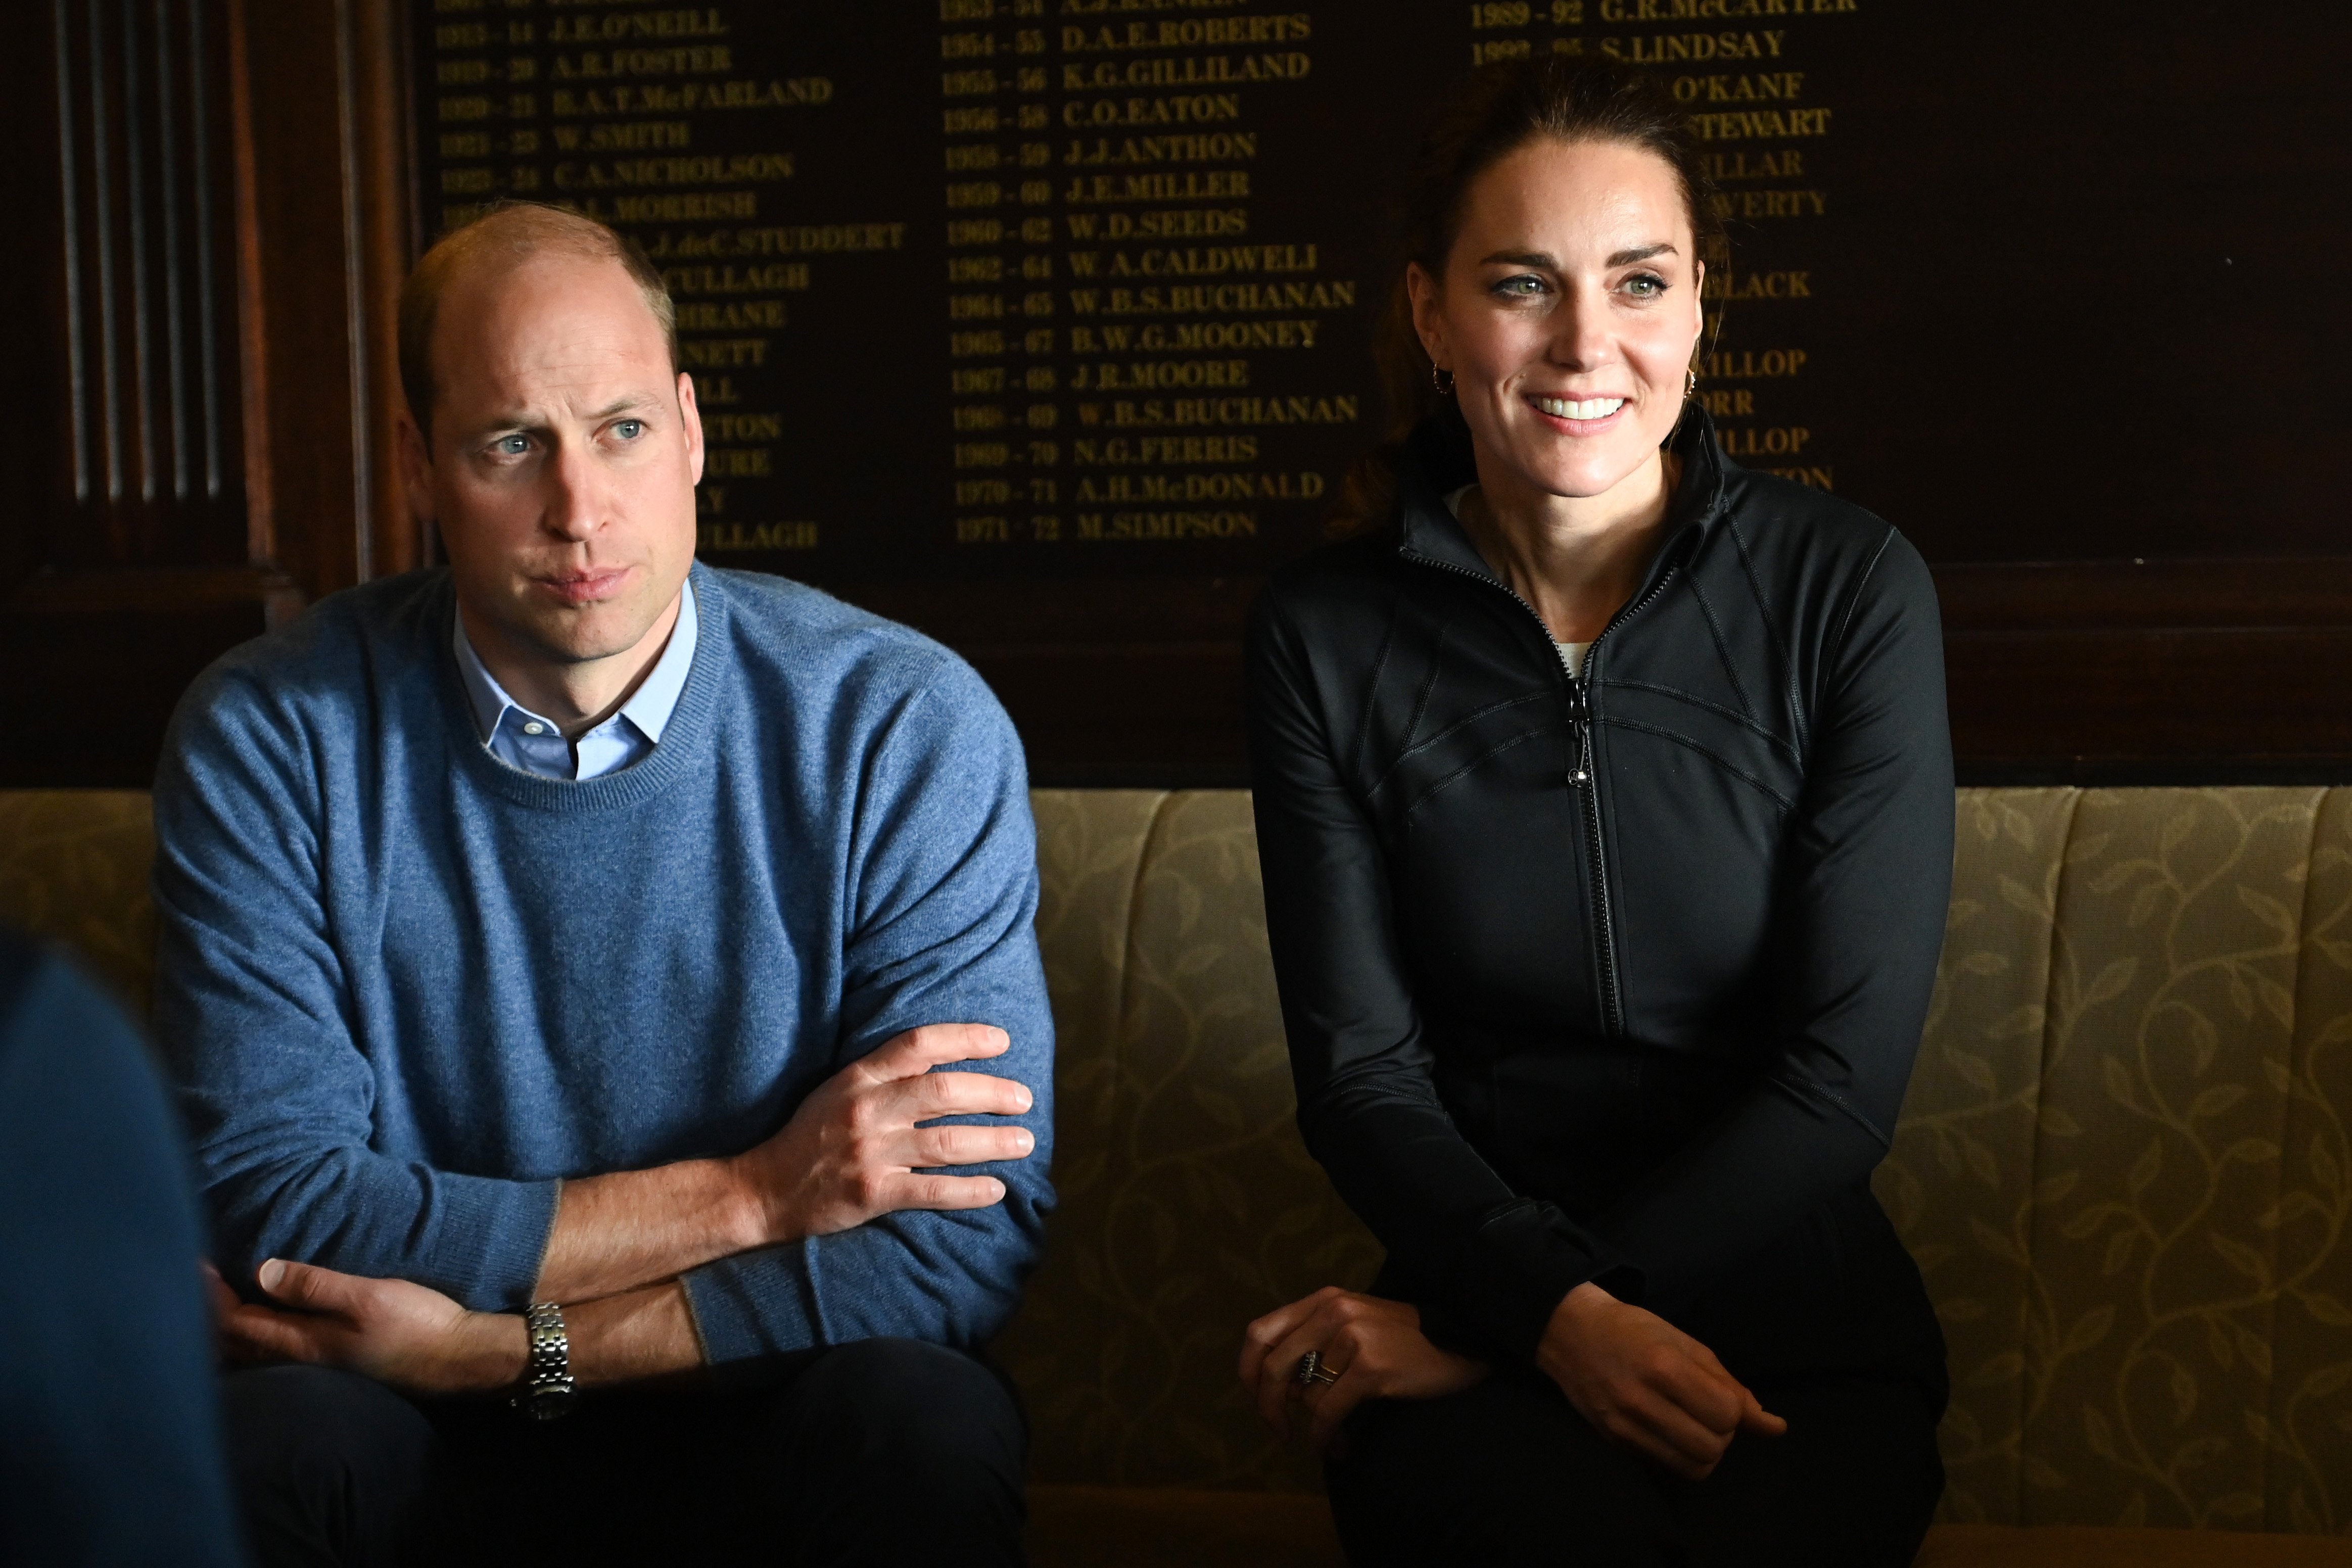 Prince William, Duke of Cambridge and Catherine, Duchess of Cambridge visit the City of Derry Rugby Club on September 29, 2021 in Londonderry, Northern Ireland | Source: Getty Images